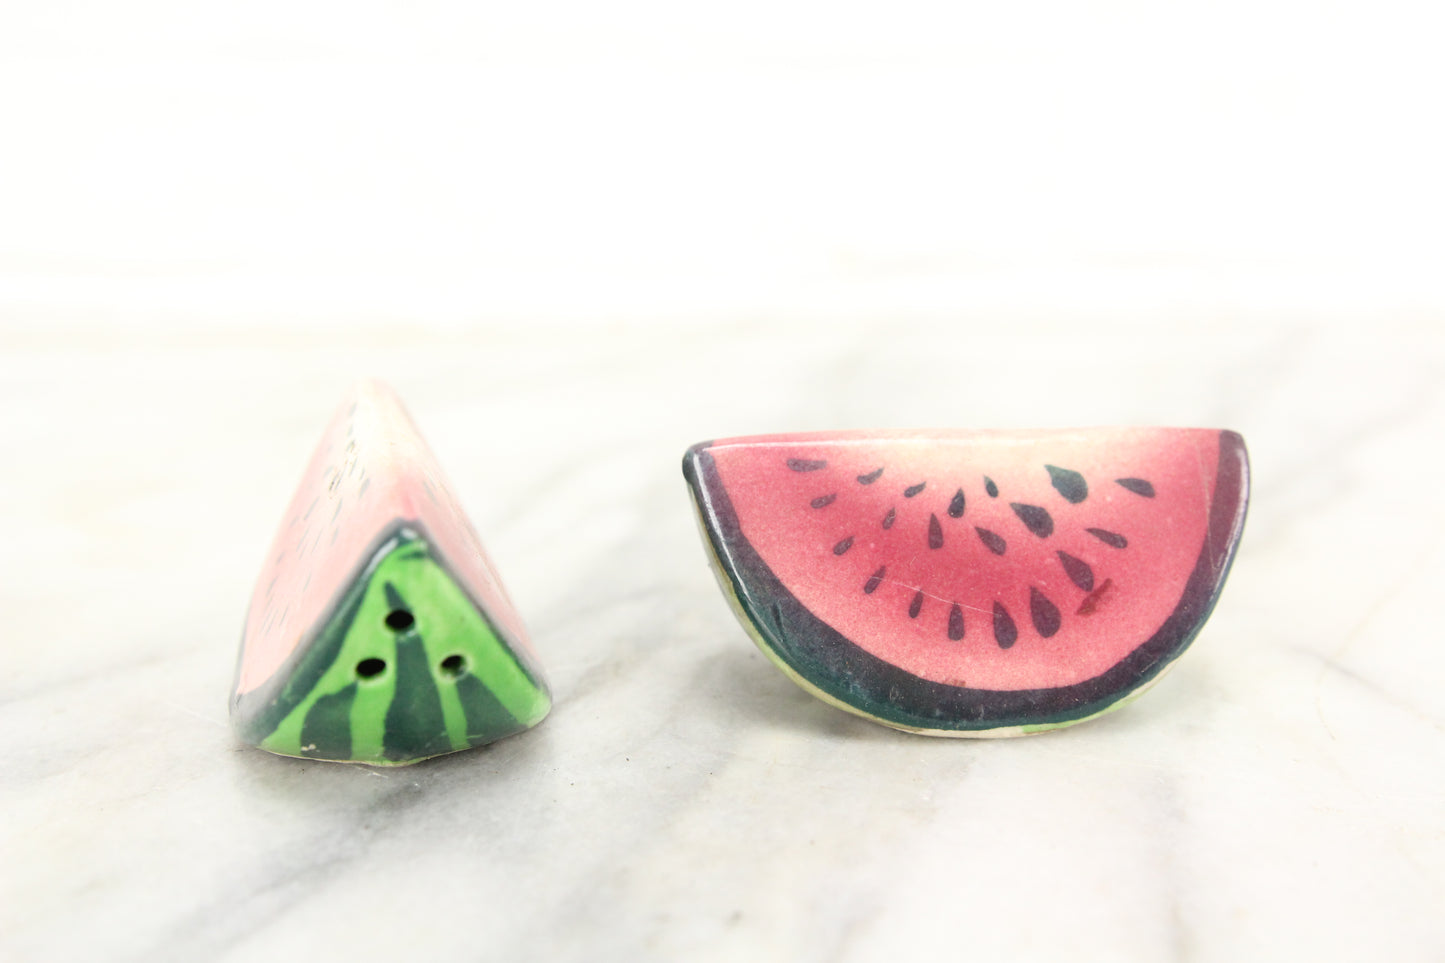 Watermelons Porcelain Salt and Pepper Shakers